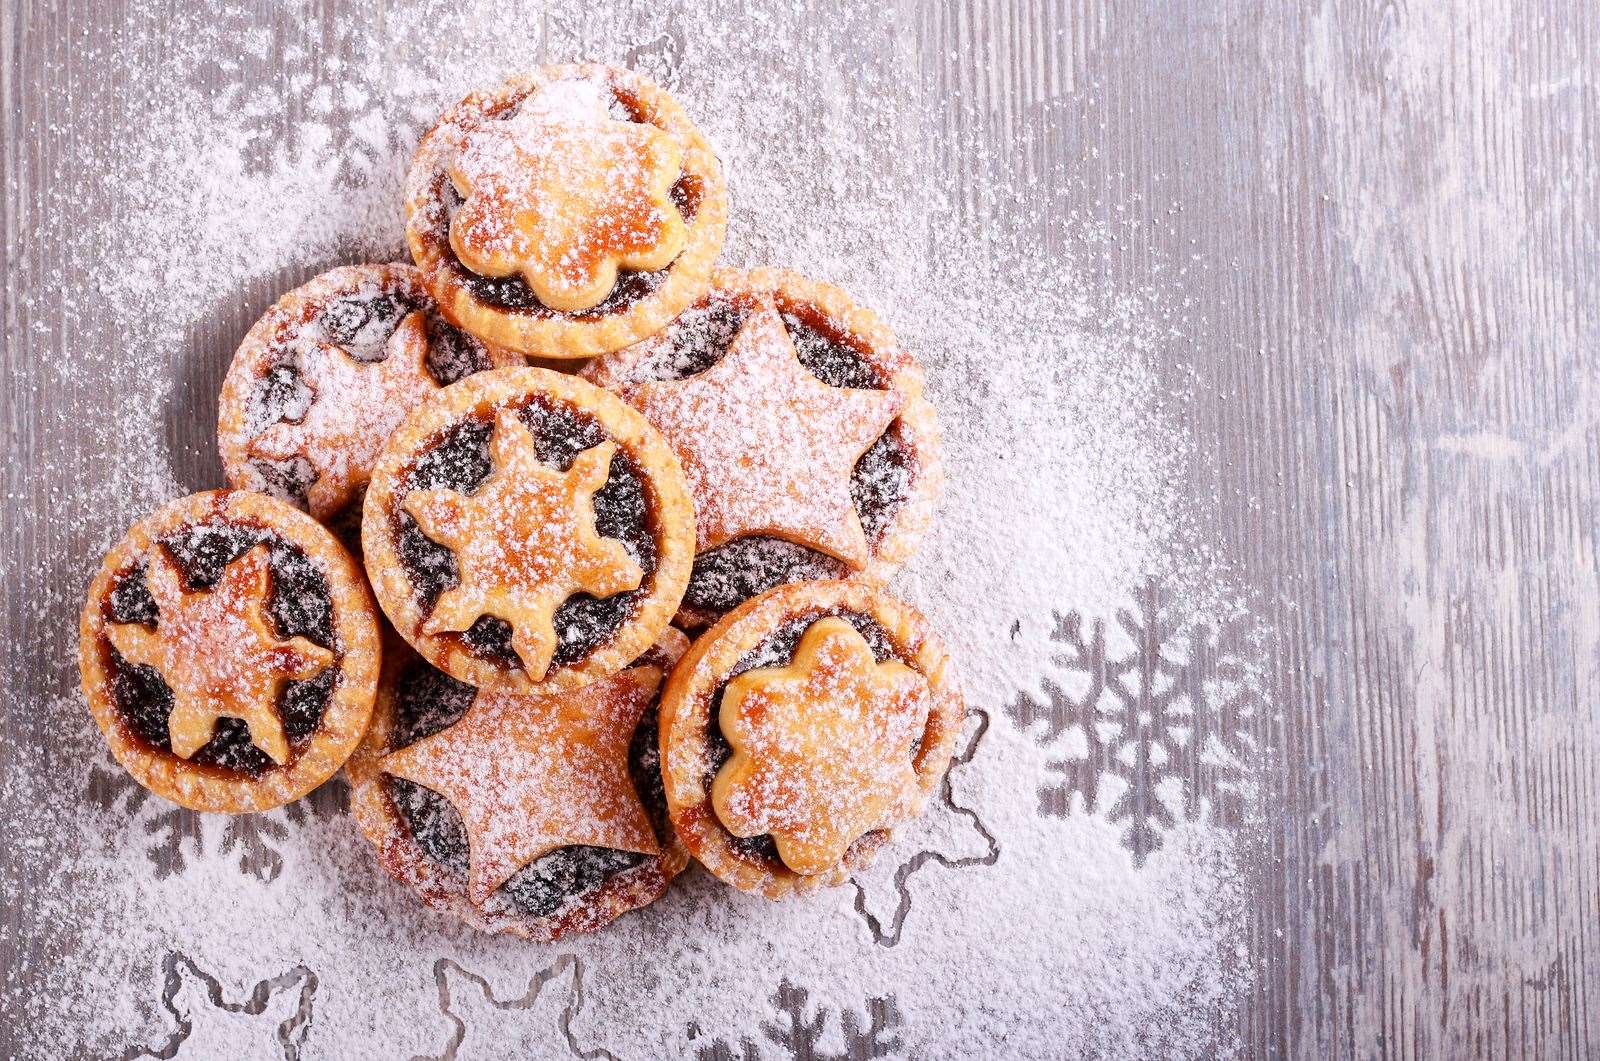 Long life Christmas food such as mince pies are welcomed providing they are alcohol free